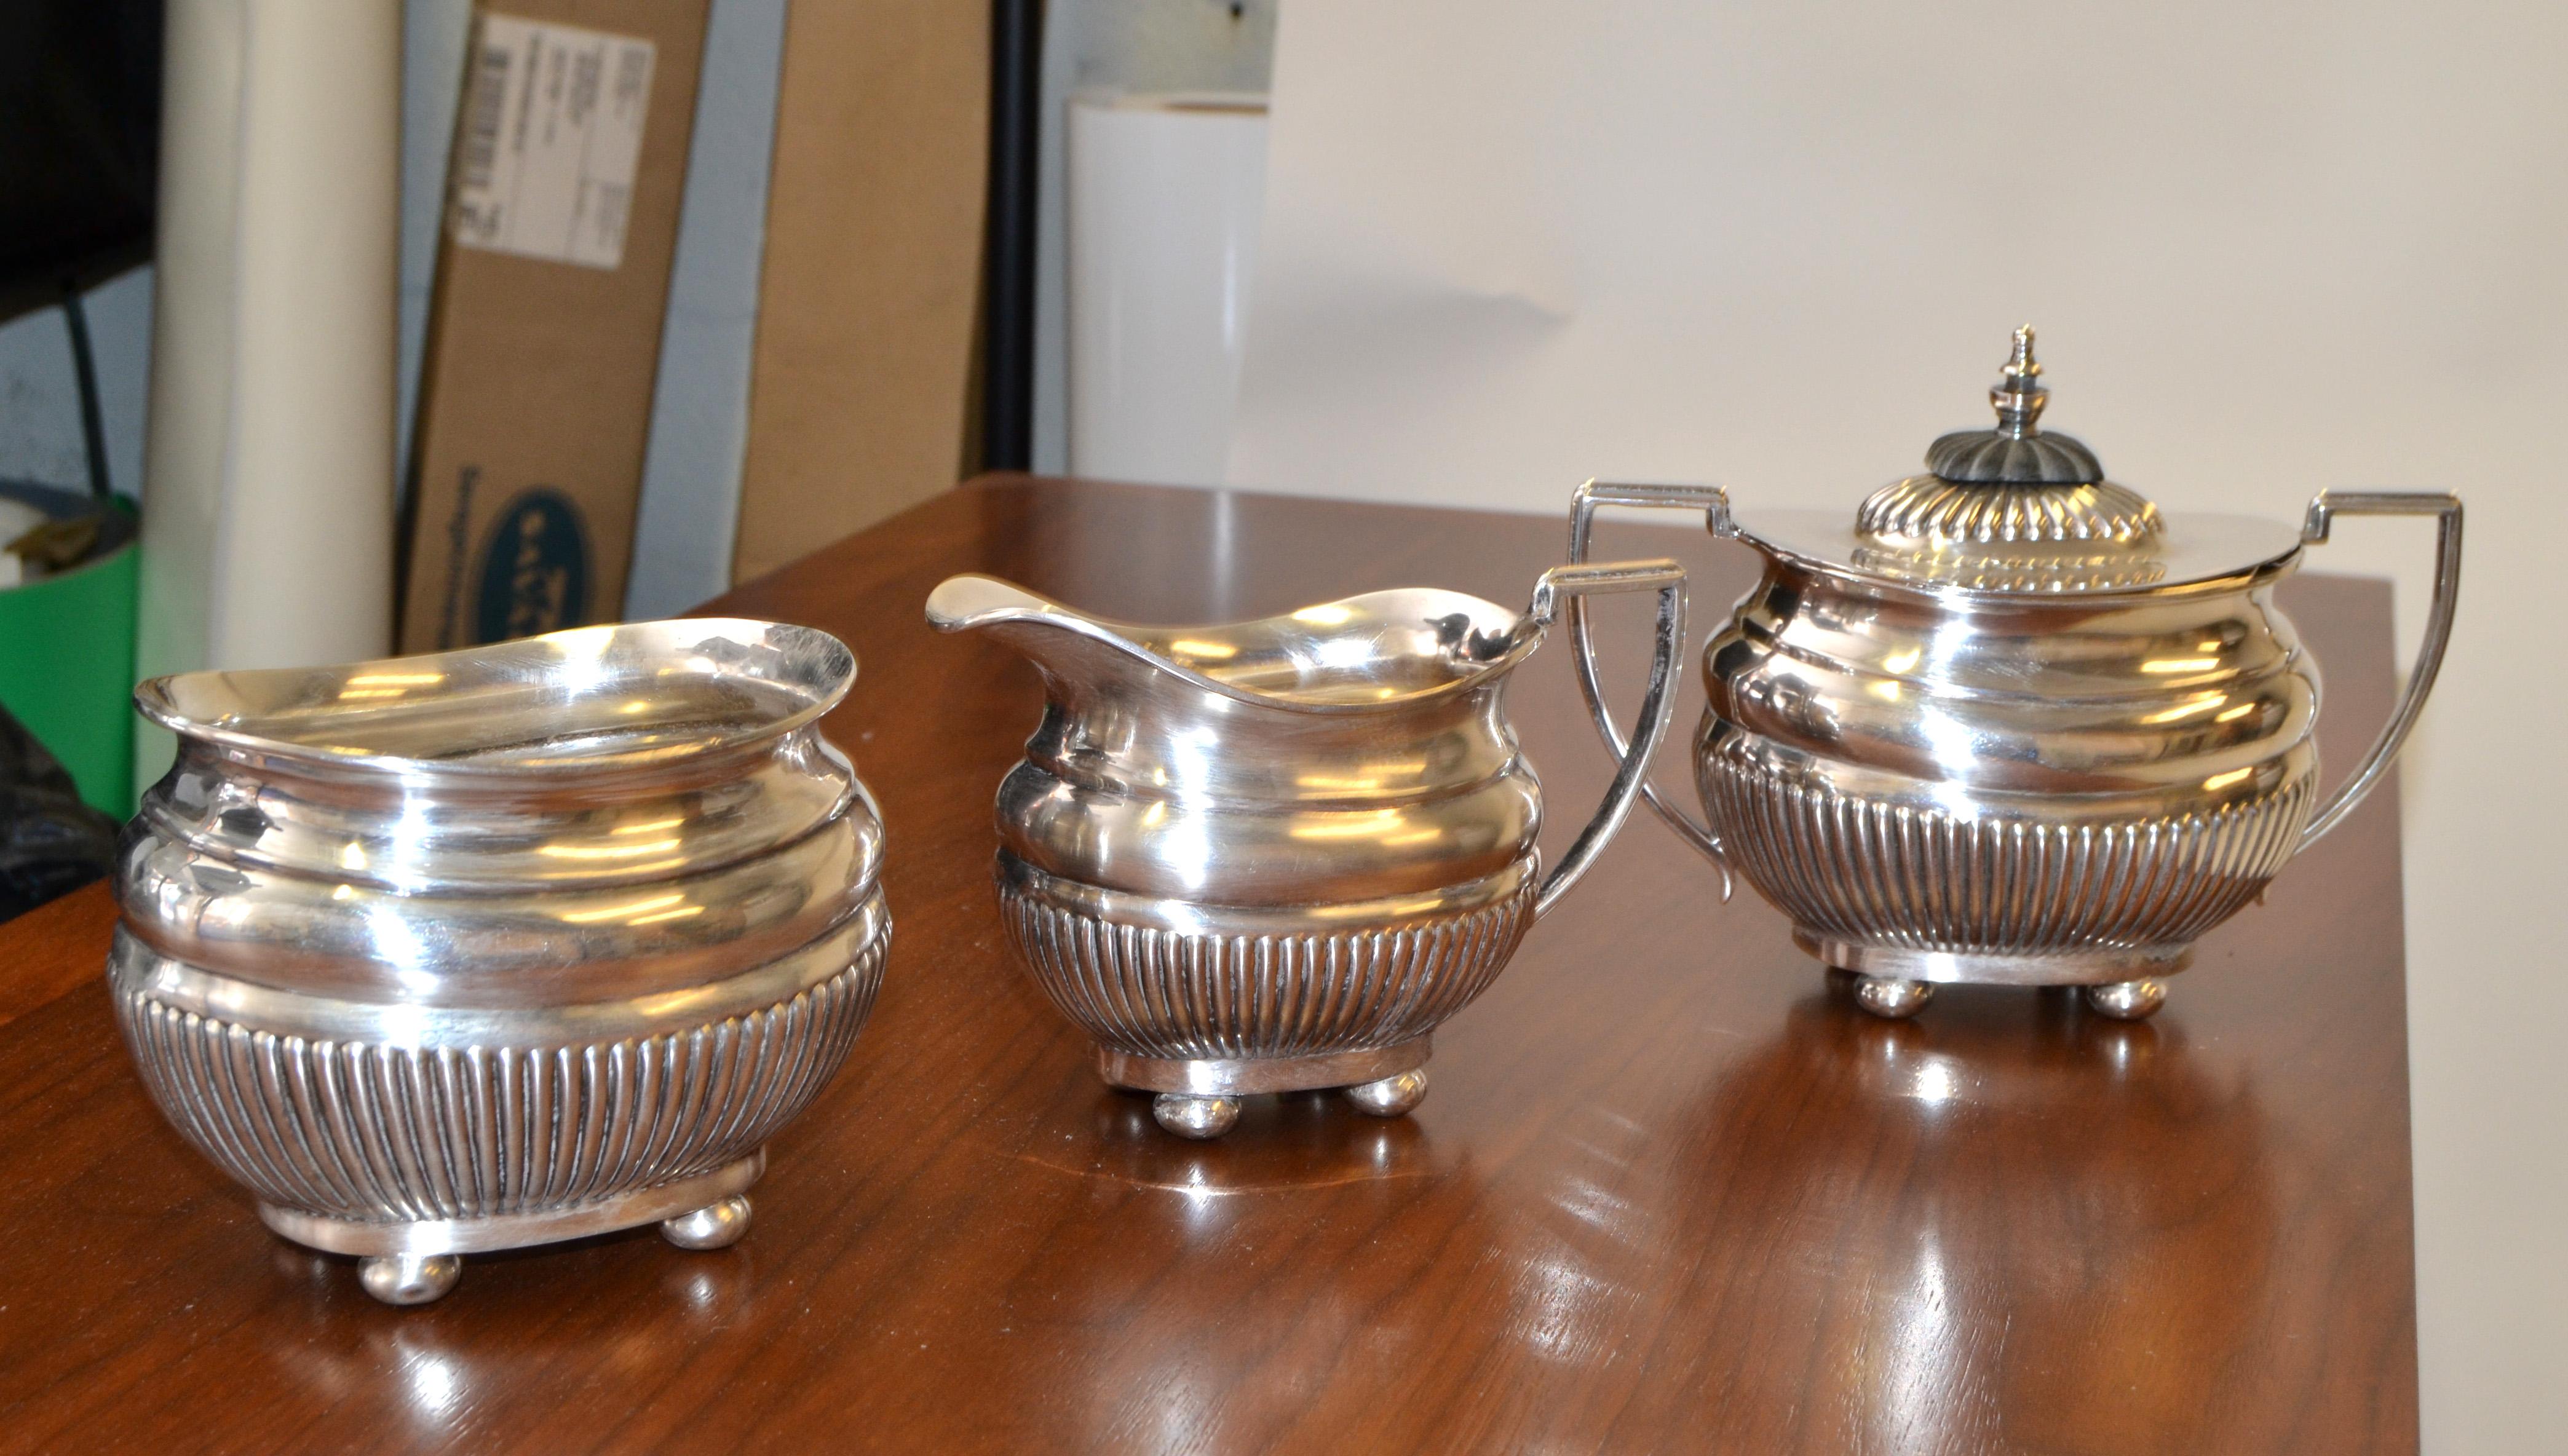 1910 English silver coffee service by Cheltenham & Company, Ltd. Sheffield, England.
All 3 pieces have the same maker's marks on the bottoms complete with the engraved W A Trademark, Warranted Hard Solder England 69430.
Open sugar dish is 7.25